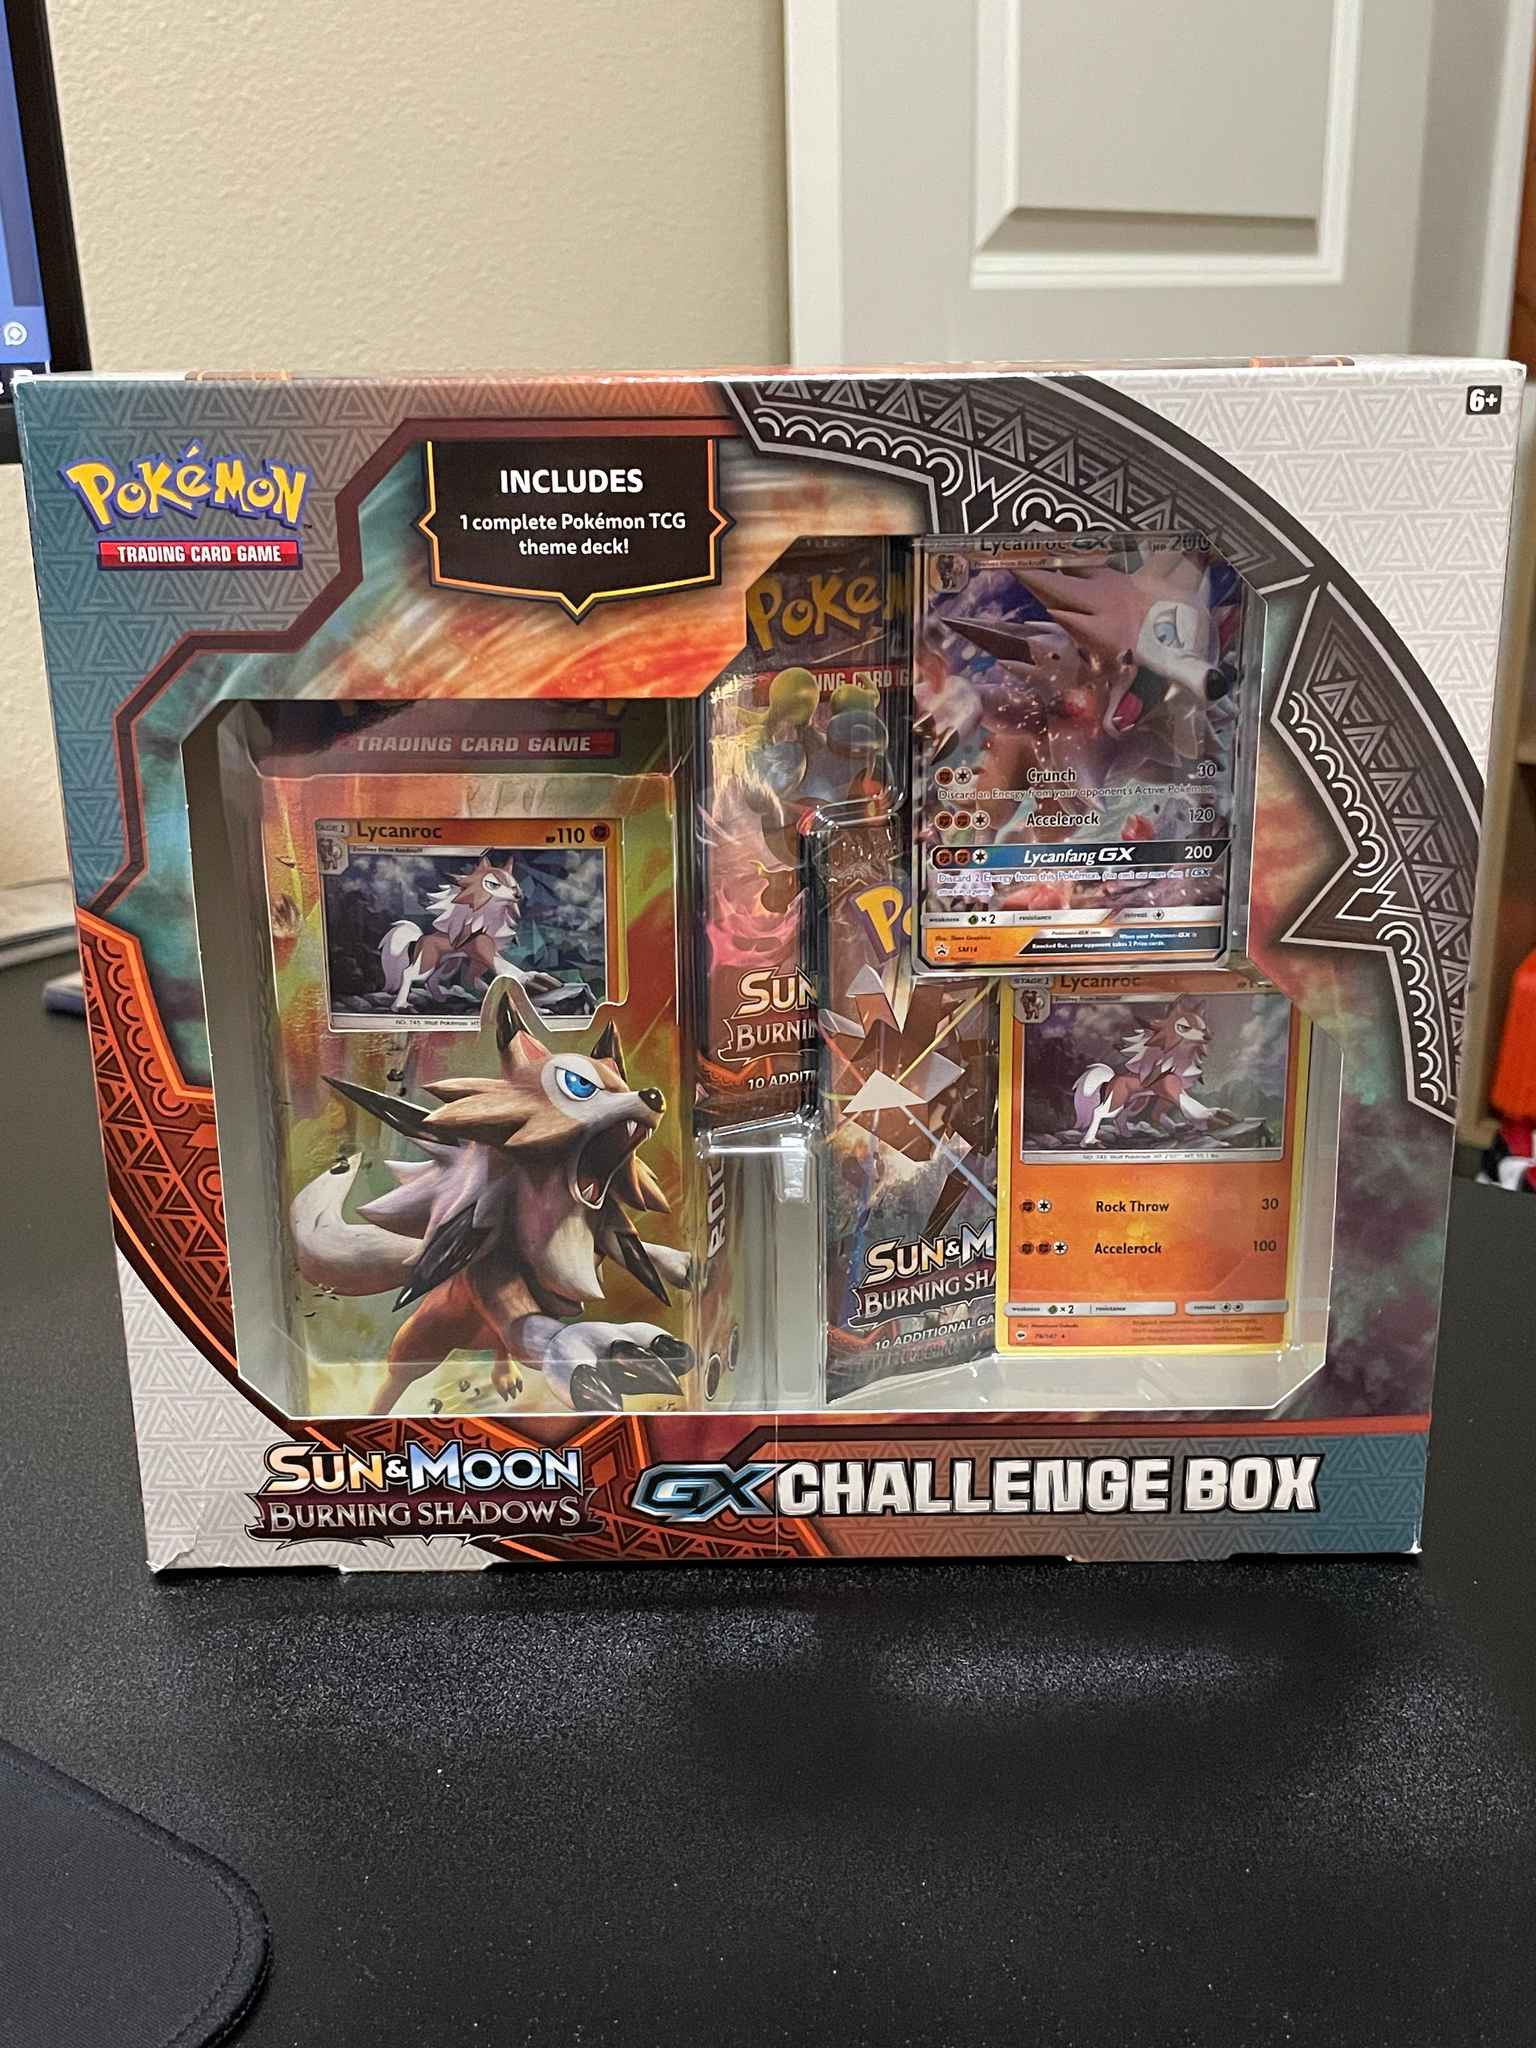 Pokémon Sun and Moon Burning Shadows GX Challenge Boxe for sale online